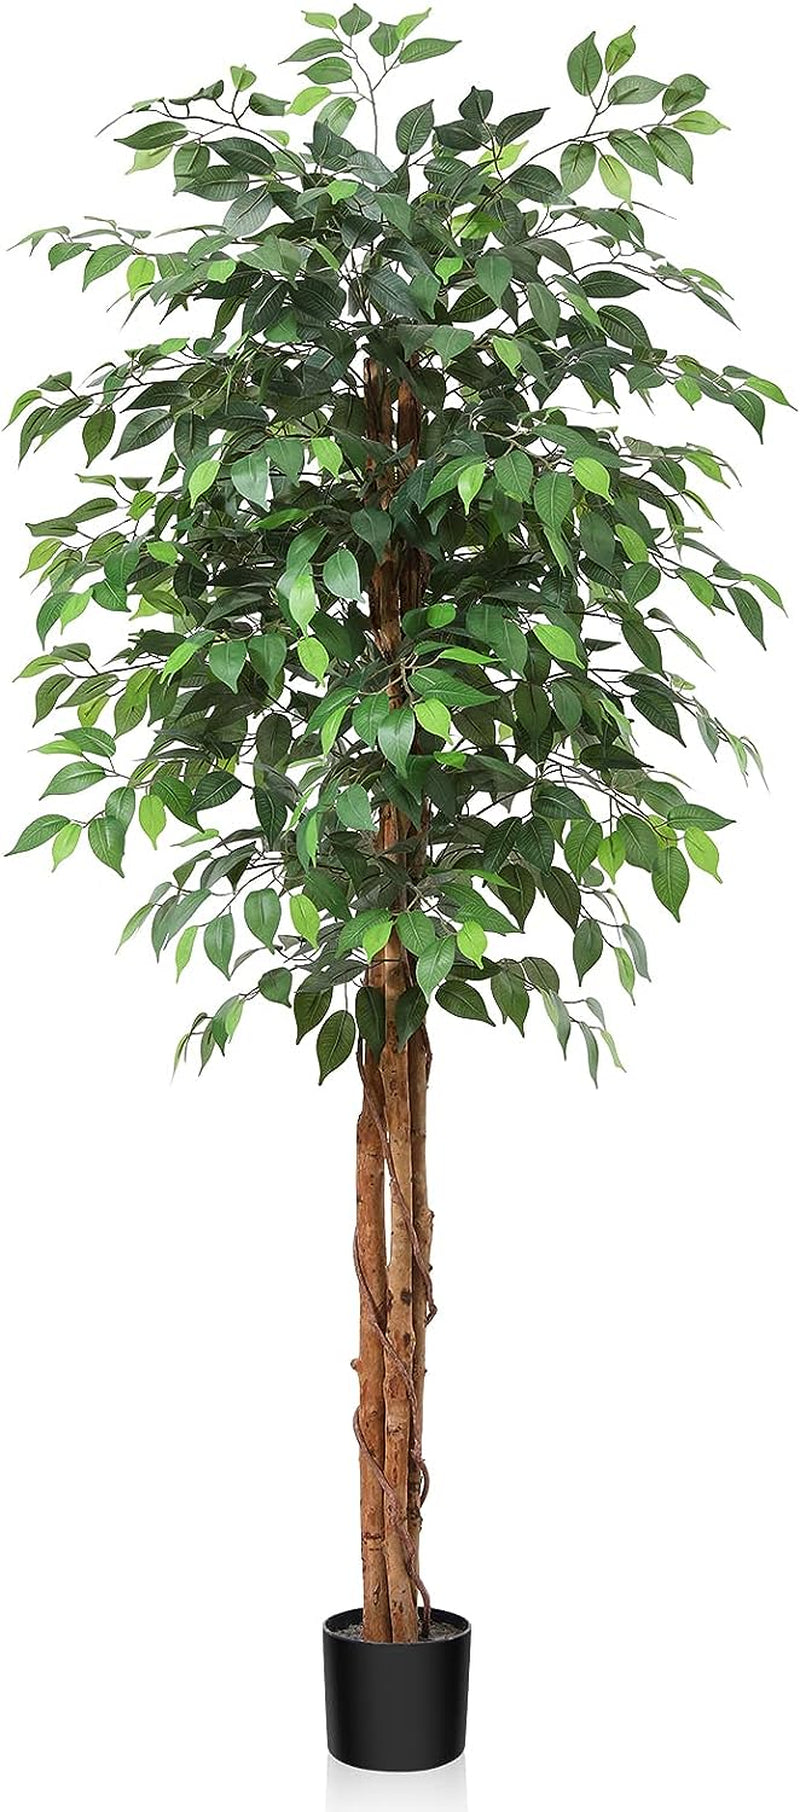 OAKRED 7FT Silk Artificial Ficus Tree with Realistic Leaves and Natural Trunk Fake Plants Tall Fake Tree Faux Ficus Tree for Office House Living Room Home Decor Indoor Outdoor,Set of 1  OAKRED 1 6 Ft 